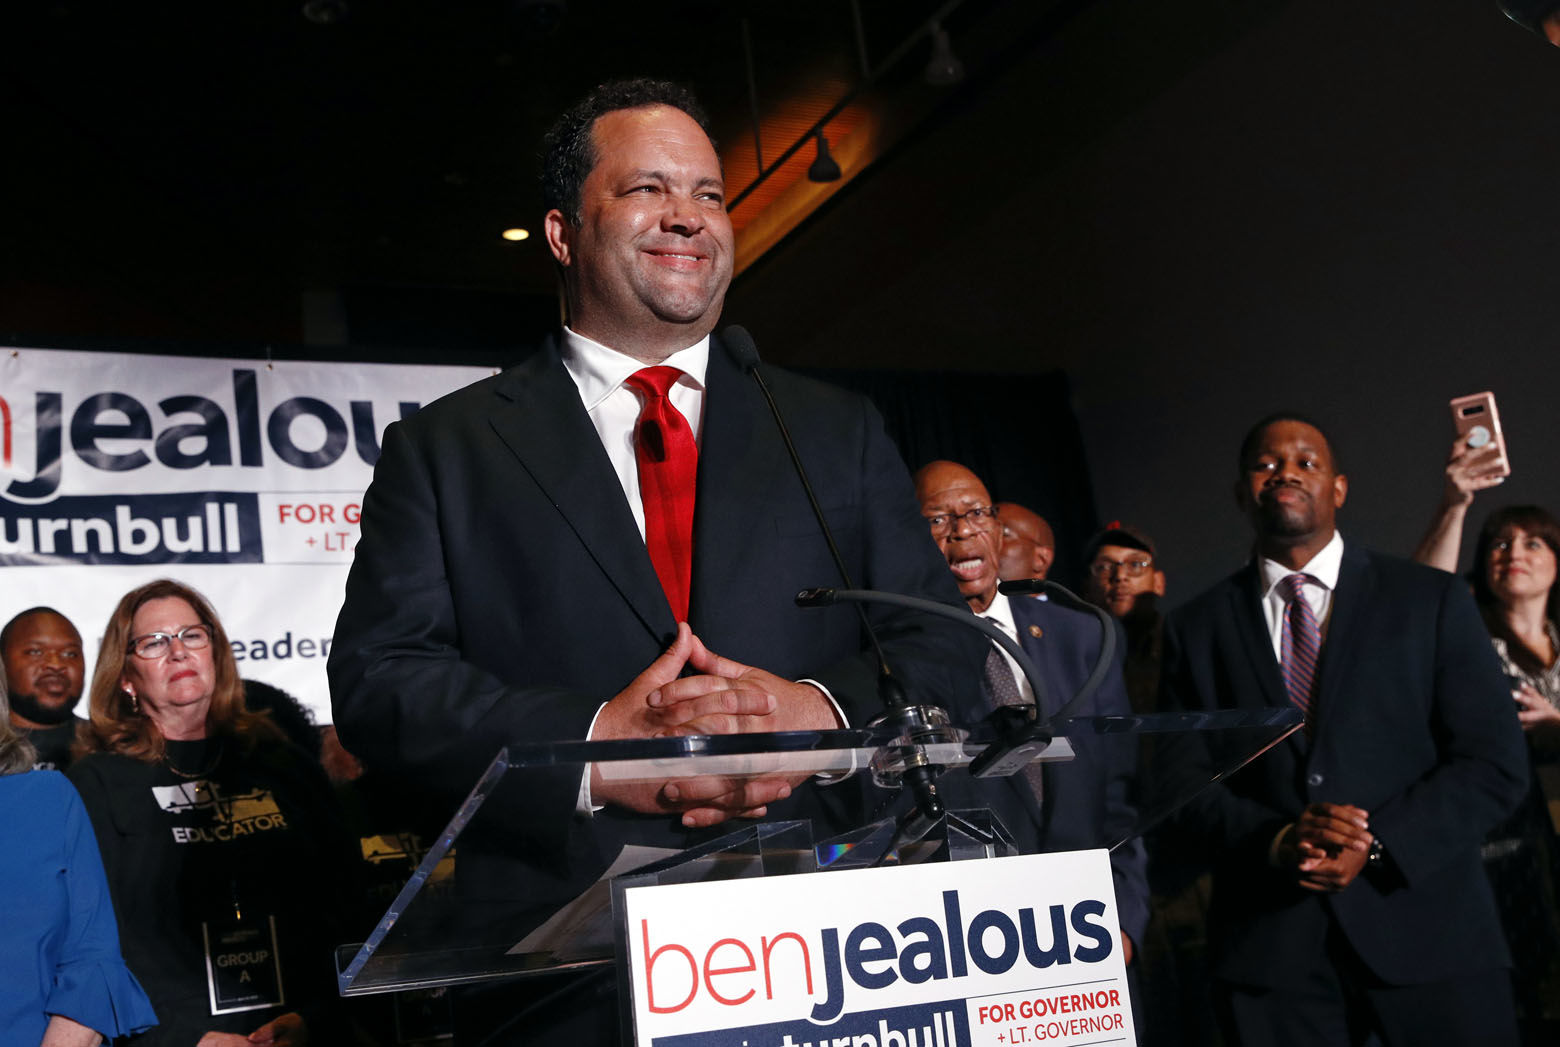 Maryland Democratic gubernatorial candidate Ben Jealous addresses supporters at an election night party, Tuesday, June 26, 2018, in Baltimore. Jealous won the Democratic nomination for governor in Maryland, setting up a battle against popular incumbent Republican Gov. Larry Hogan in the fall. (AP Photo/Patrick Semansky)